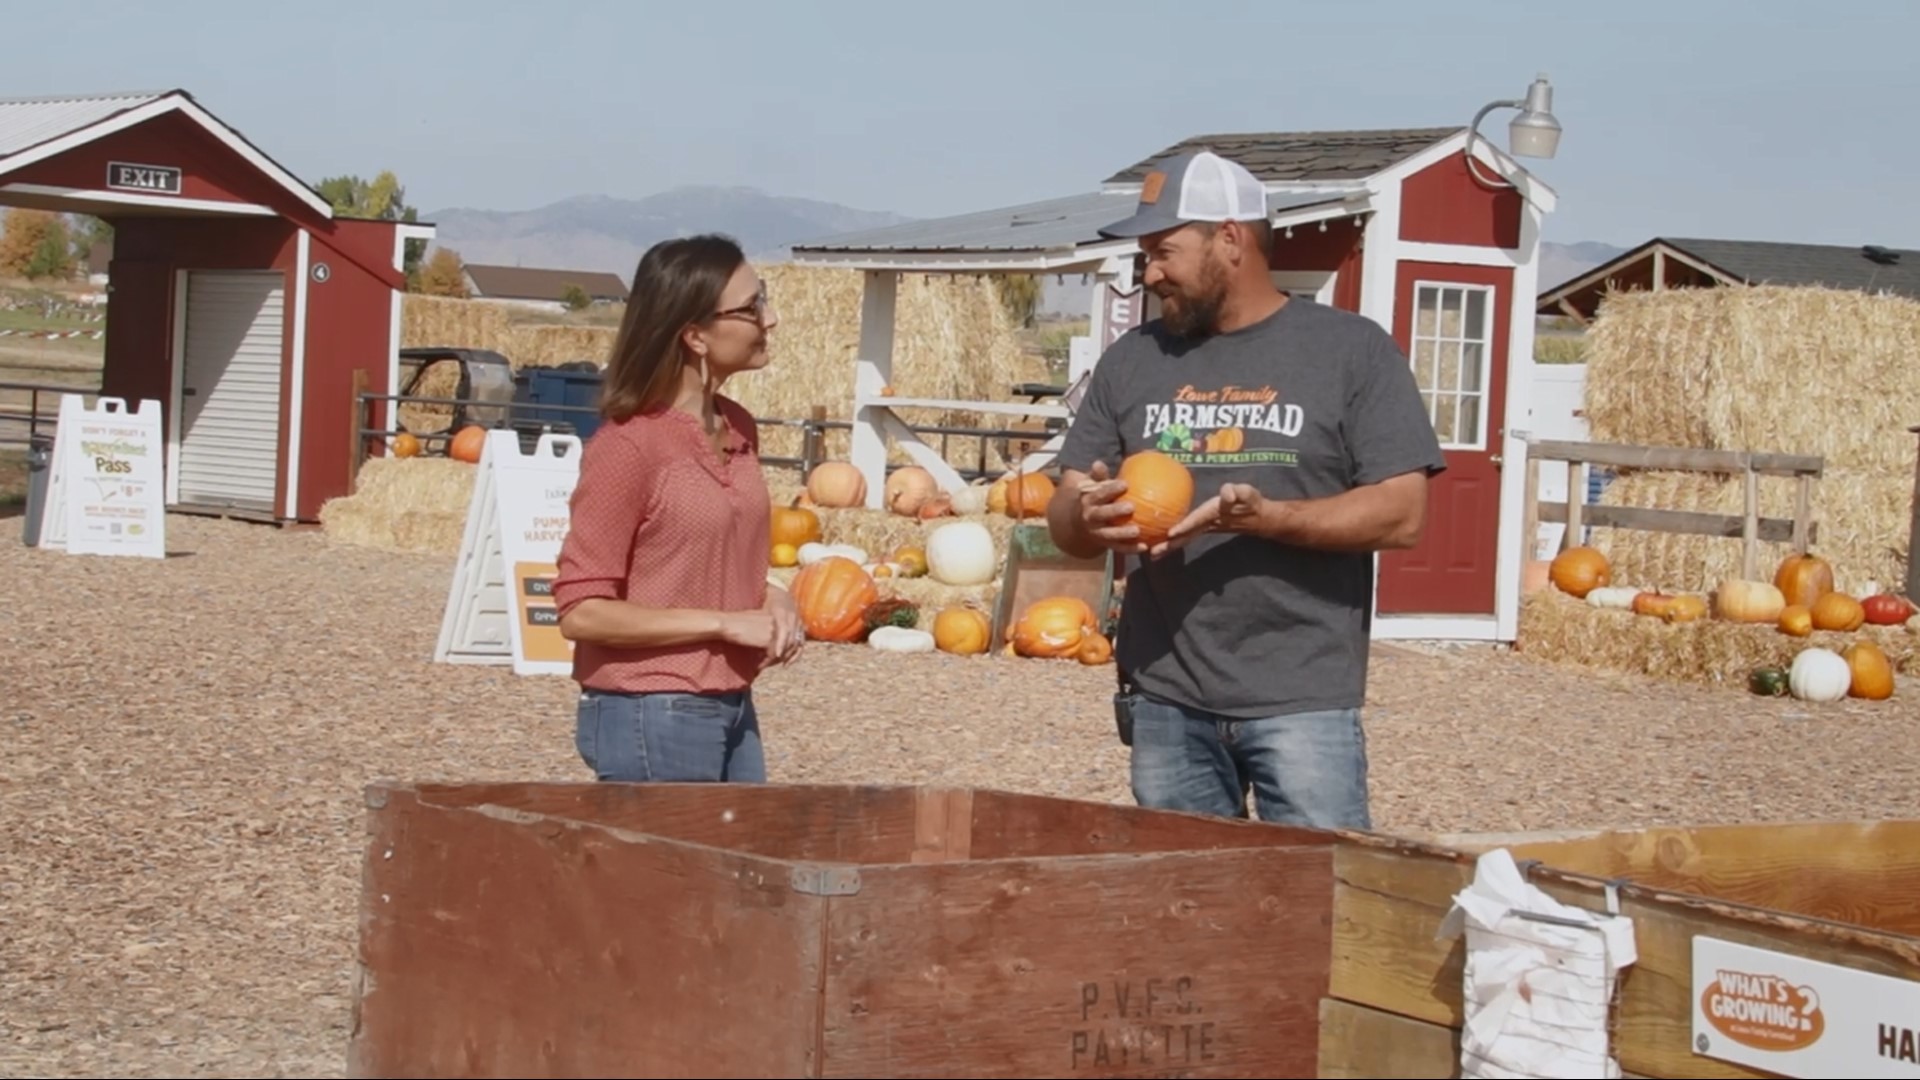 Jim Lowe with Lowe Family Farmstead shares with us the over 50 different types of pumpkins available at the Lowe Family Farmstead in Kuna.